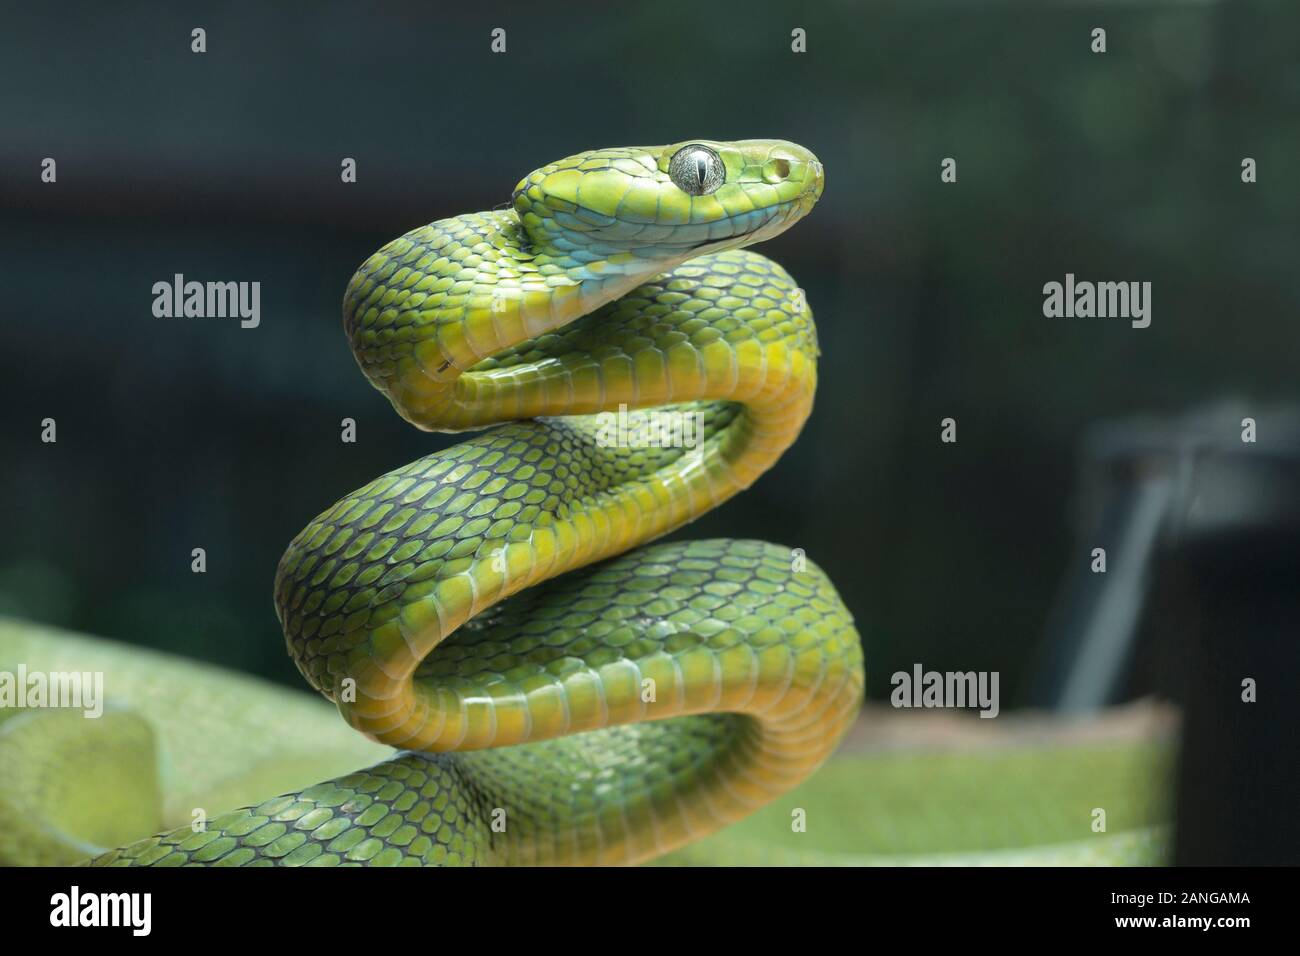 Boiga cyanea, Colubrid snake species found in South Asia, China and South-east Asia Stock Photo